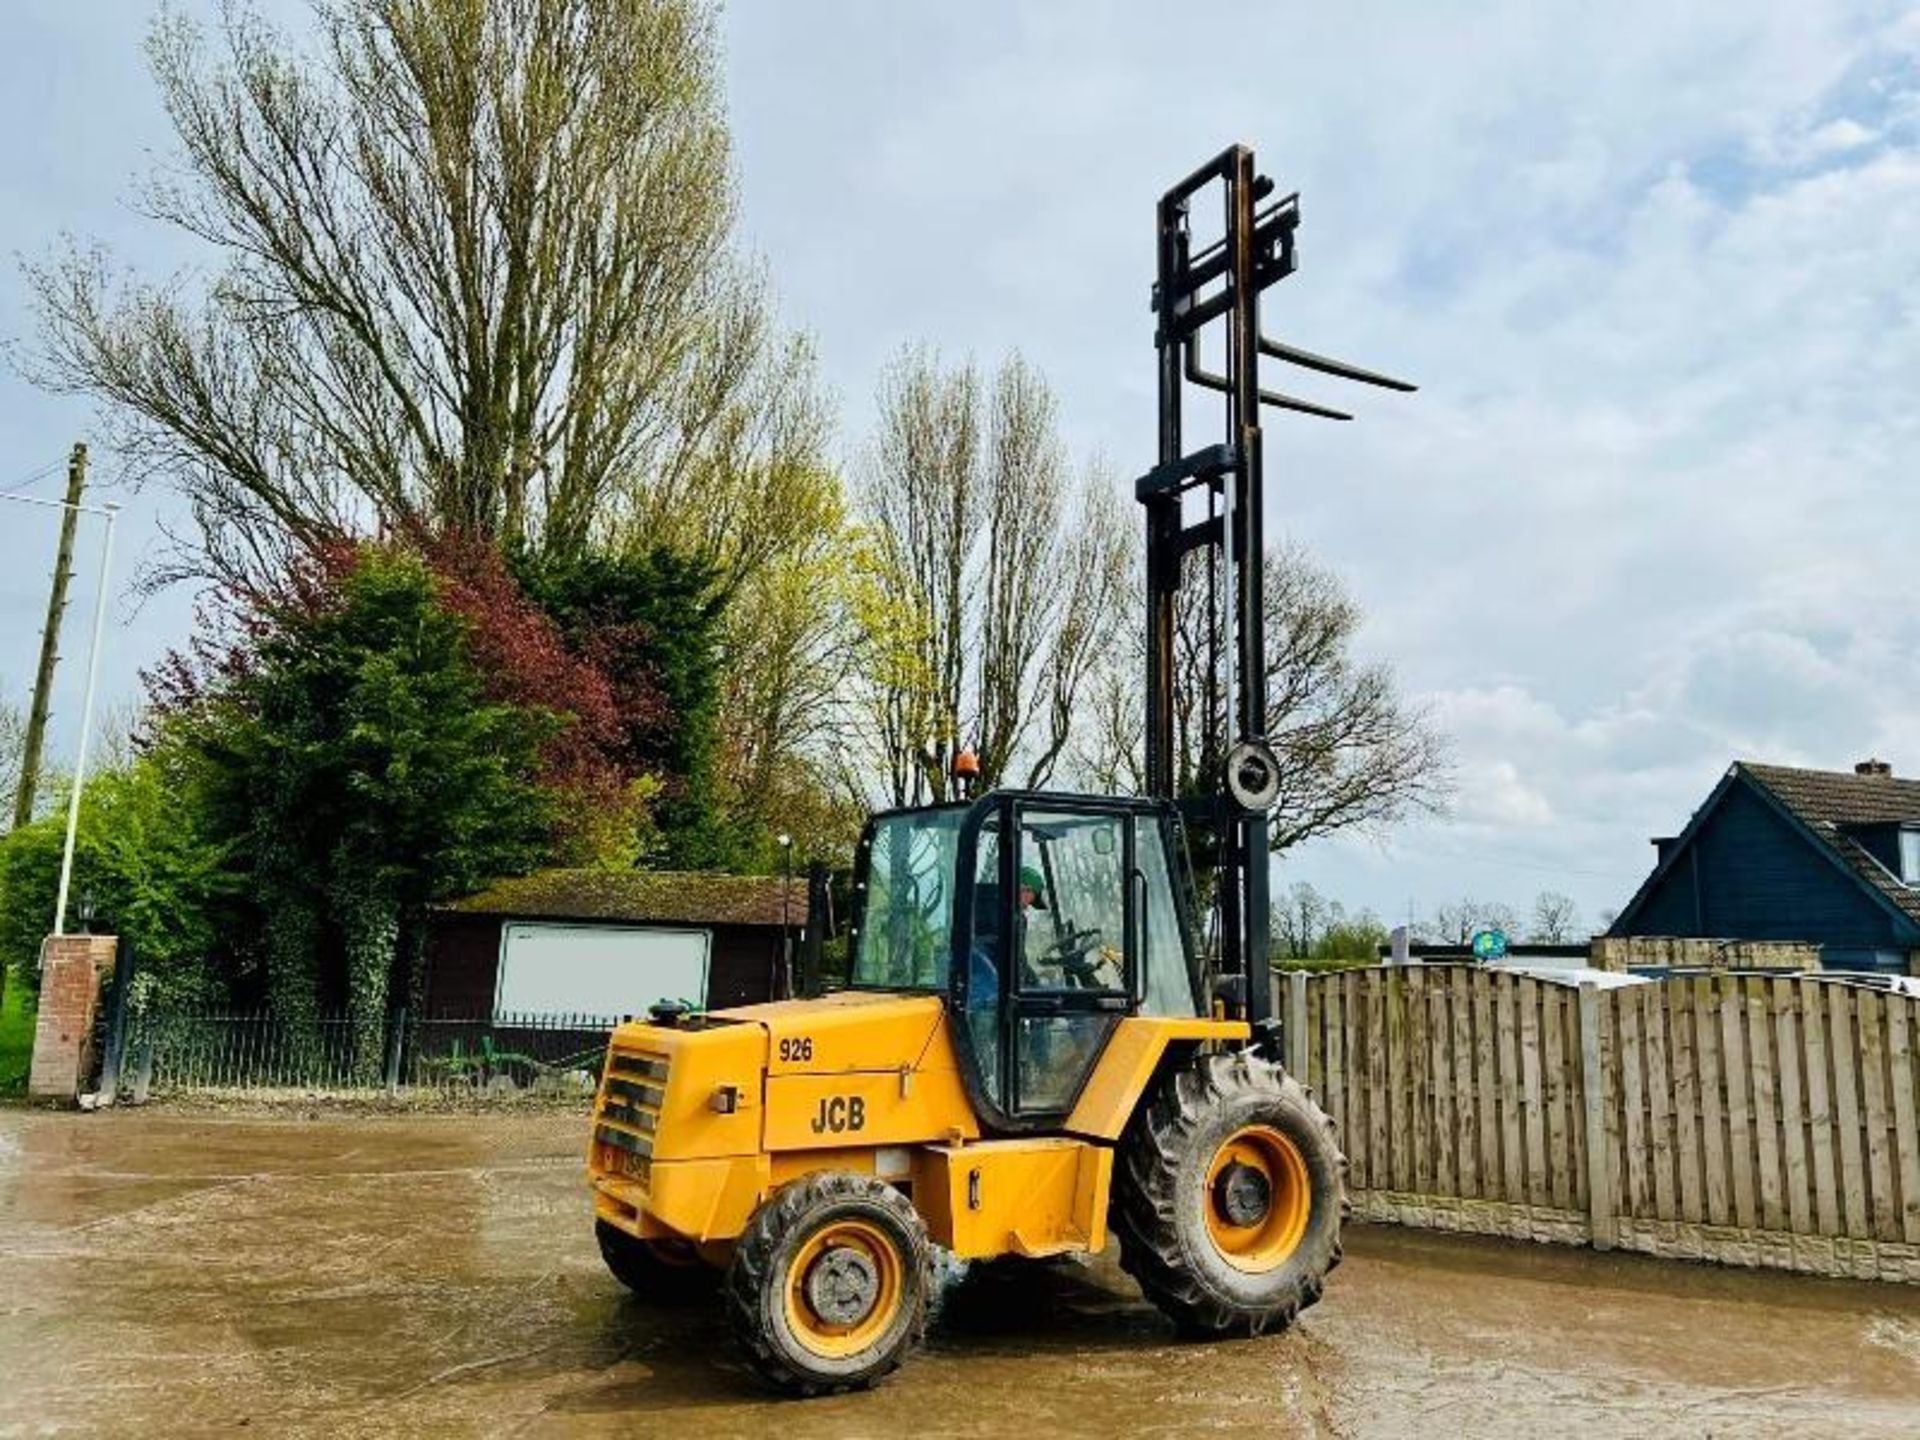 JCB 926 ROUGH TERRIAN 4WD FORKLIFT C/W PALLET TINES - Image 16 of 16